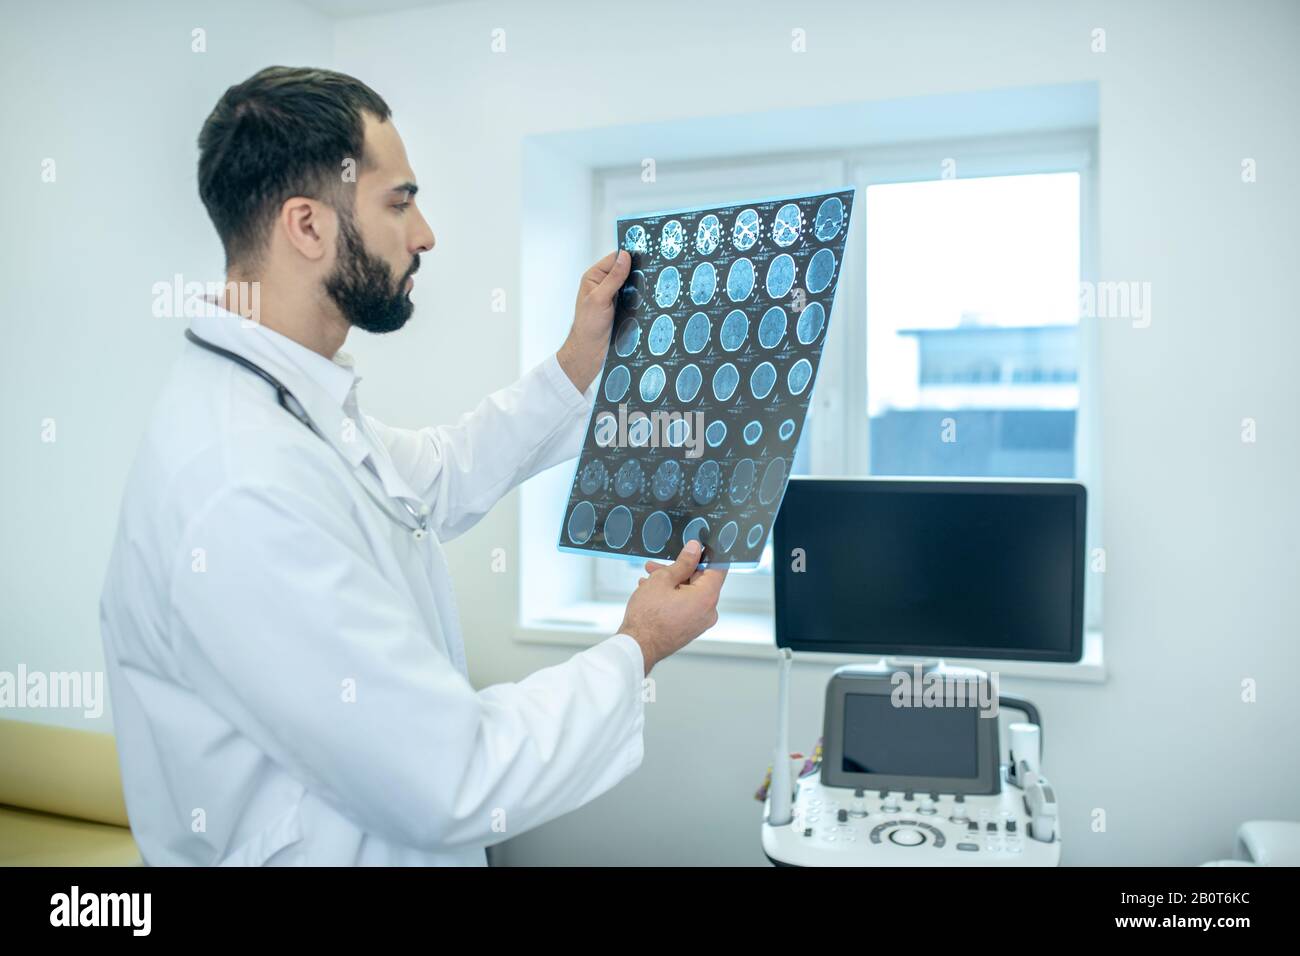 Male bearded doctor in a white robe analyzing MRI results looking concentrated Stock Photo